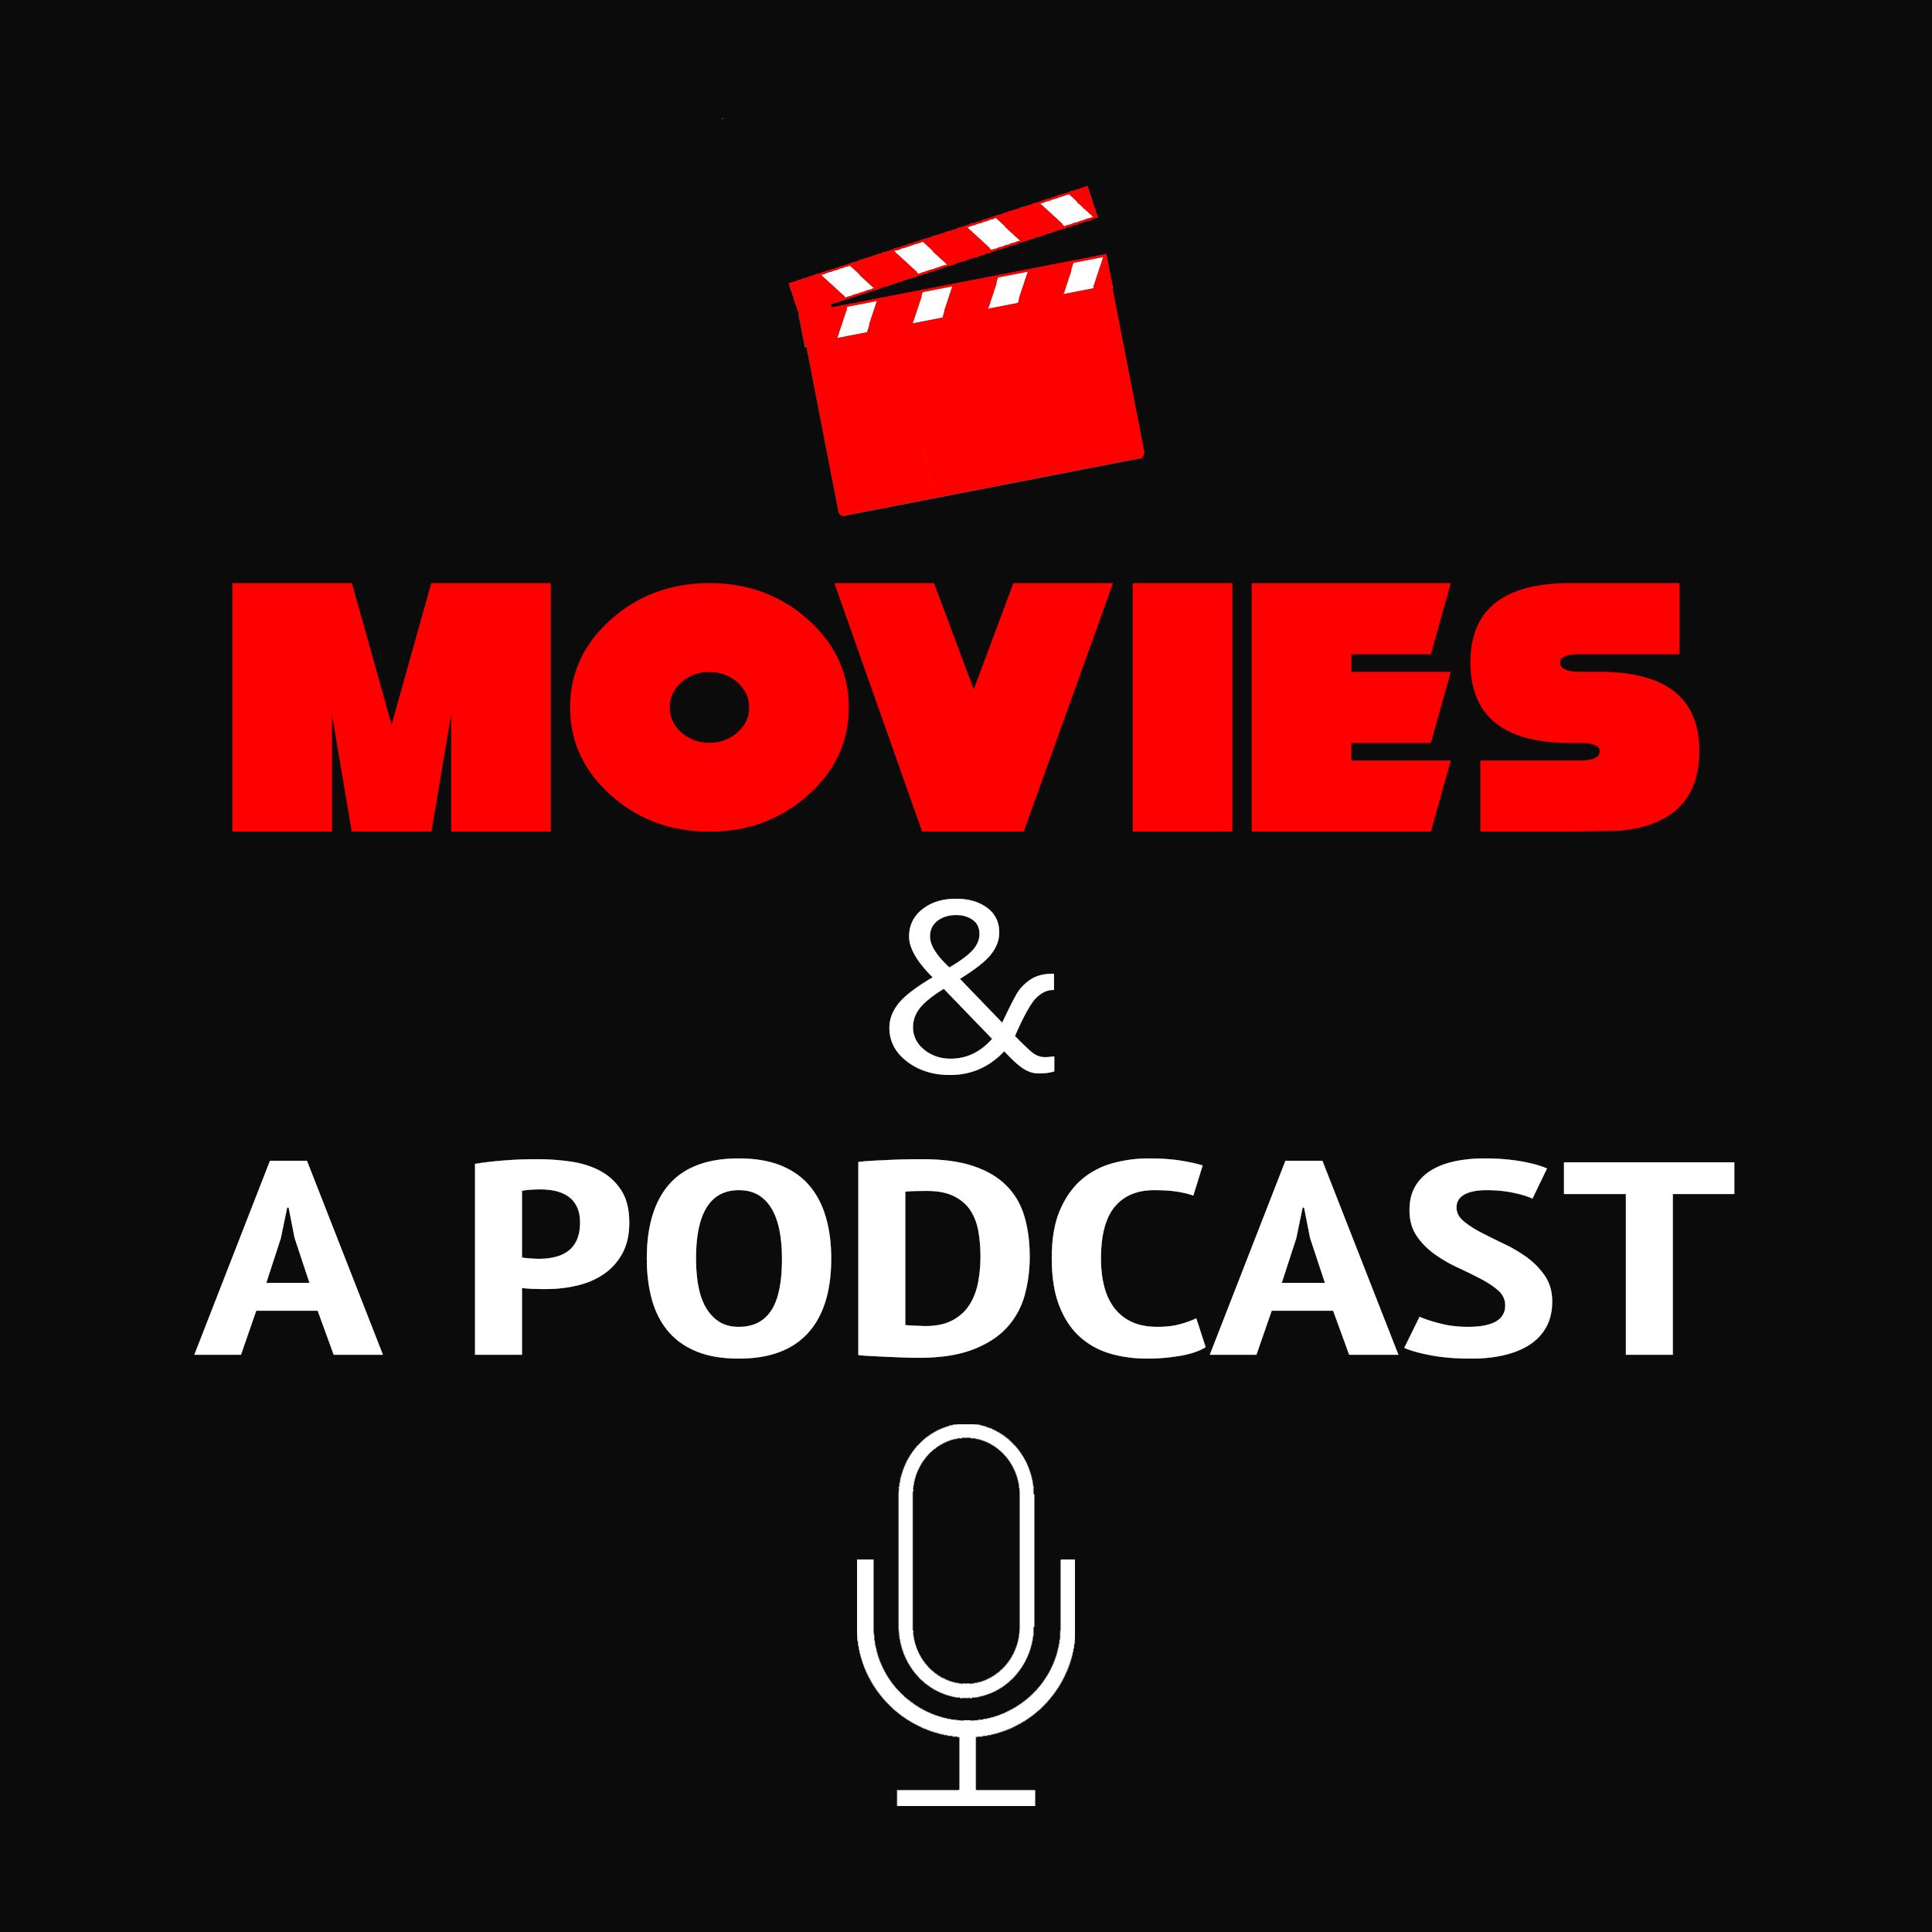 Movies & A Podcast